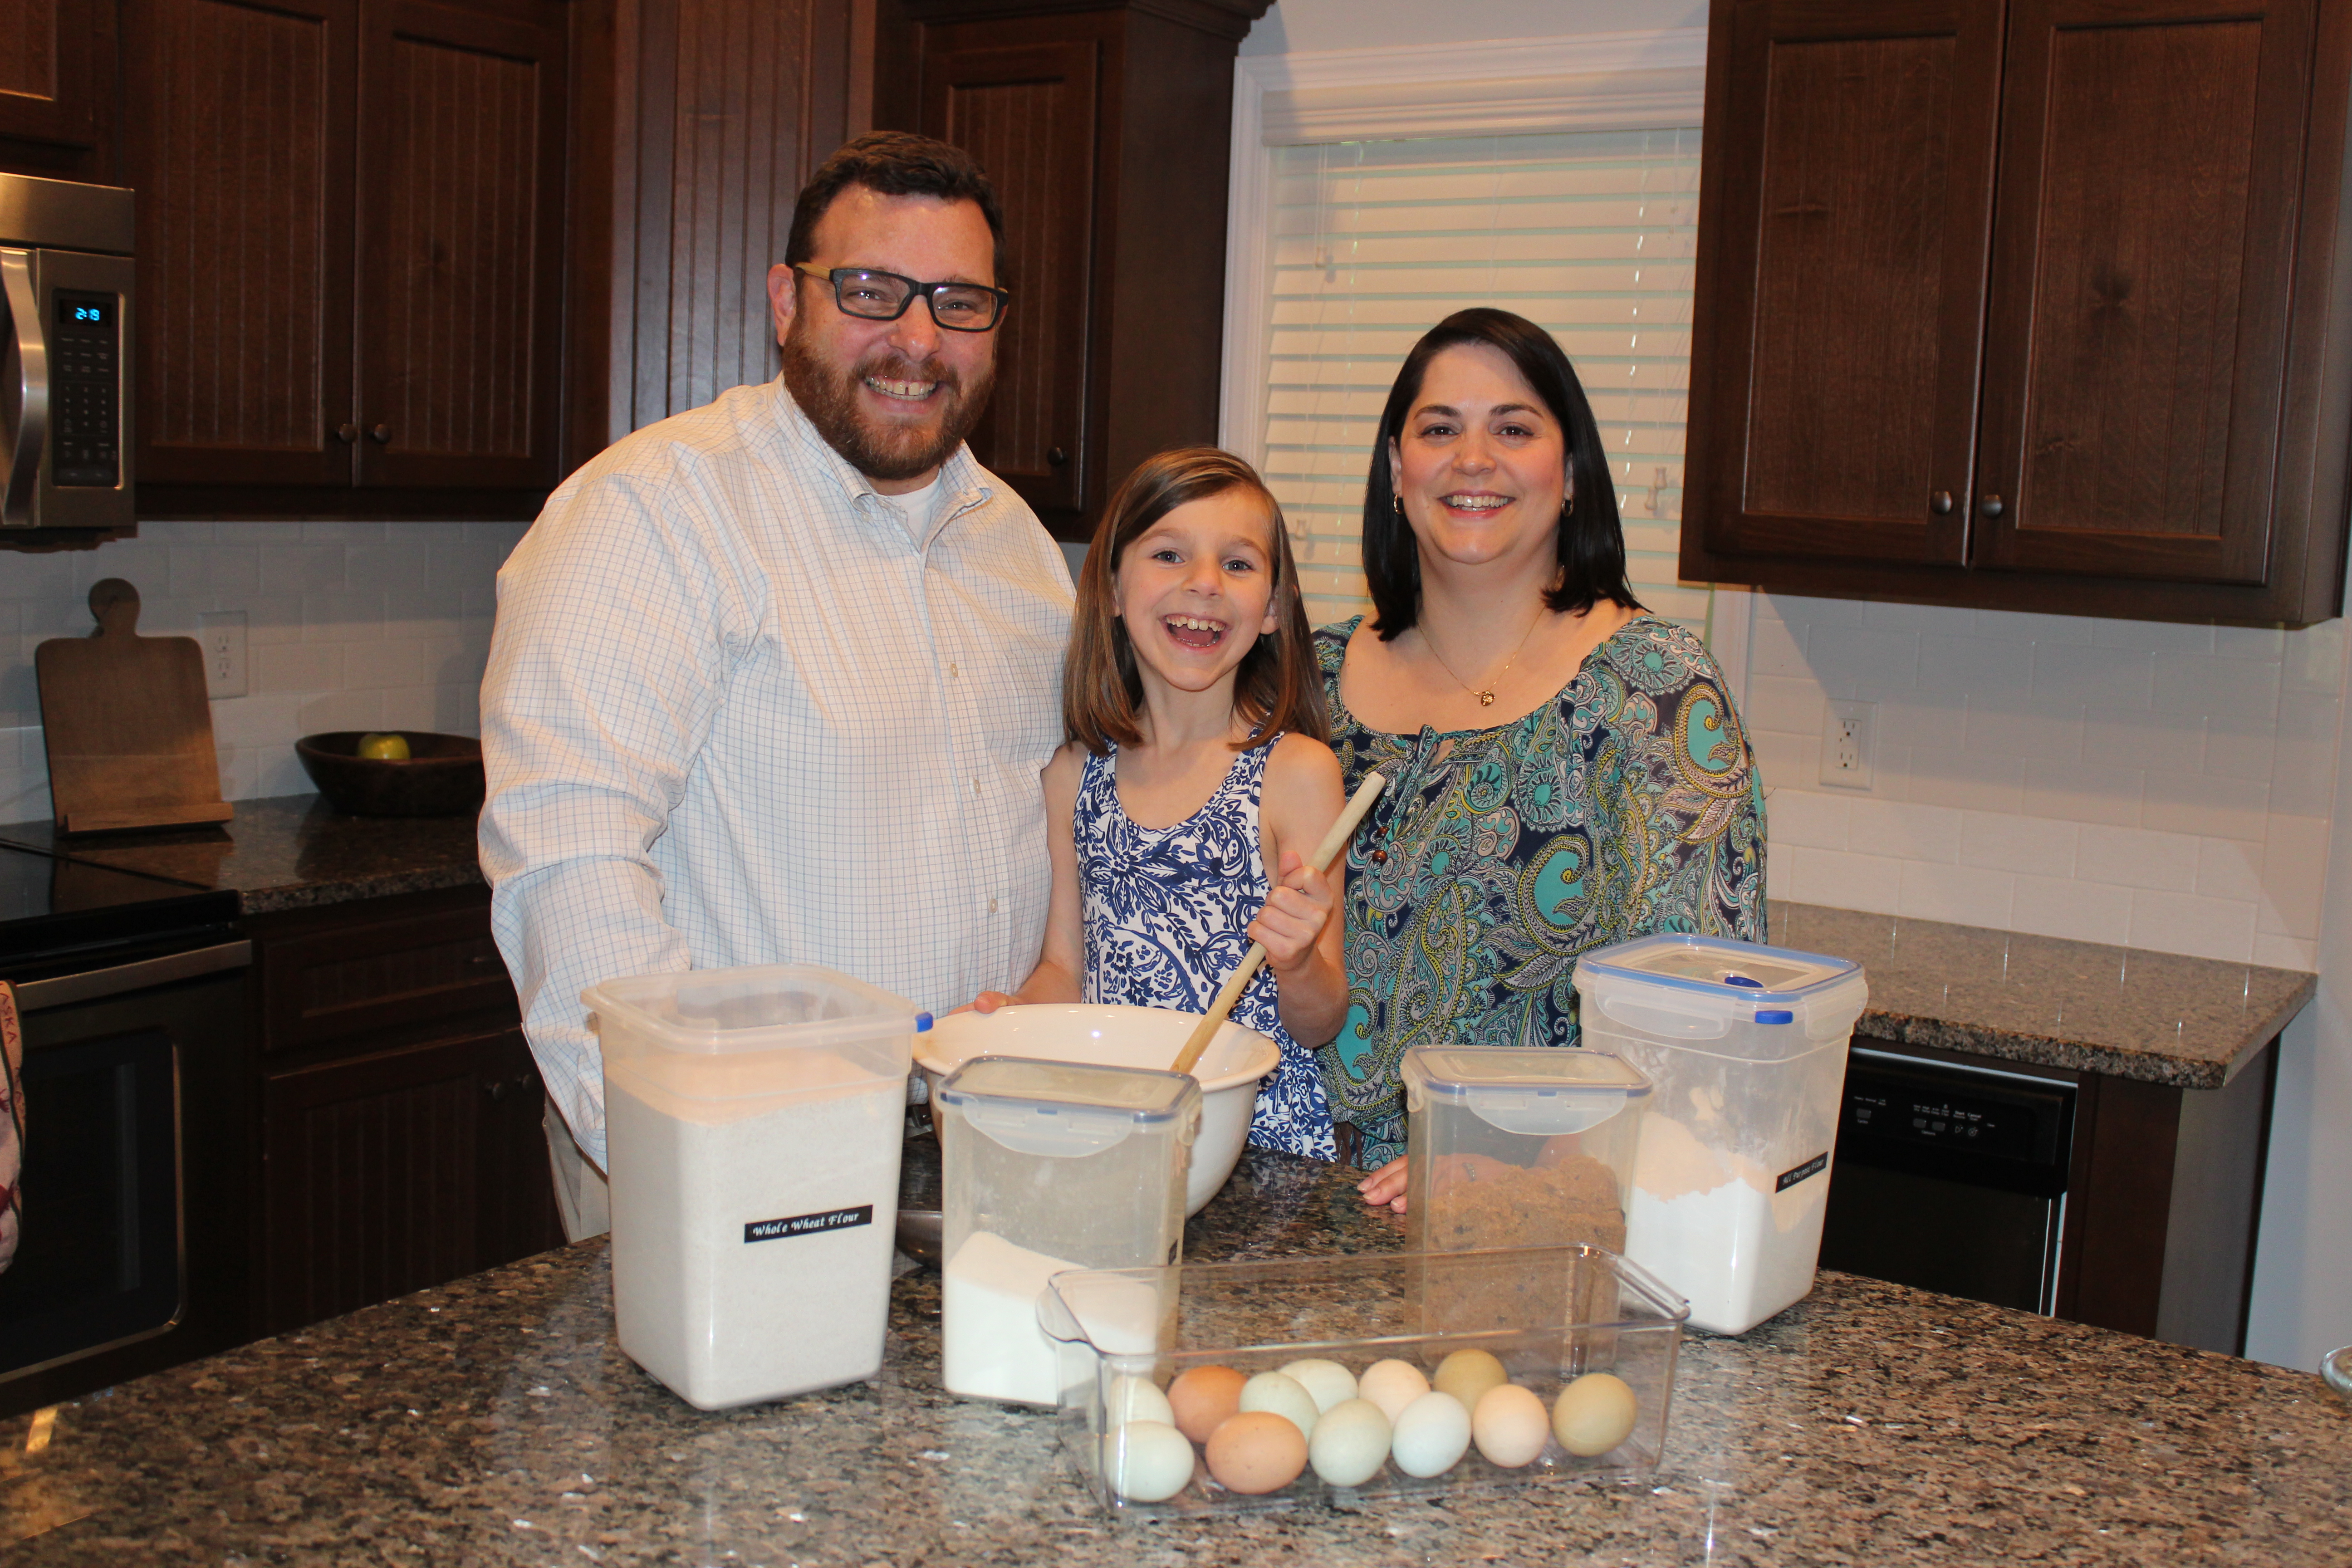 Jamie Flick shares recipes, thoughts on being a father